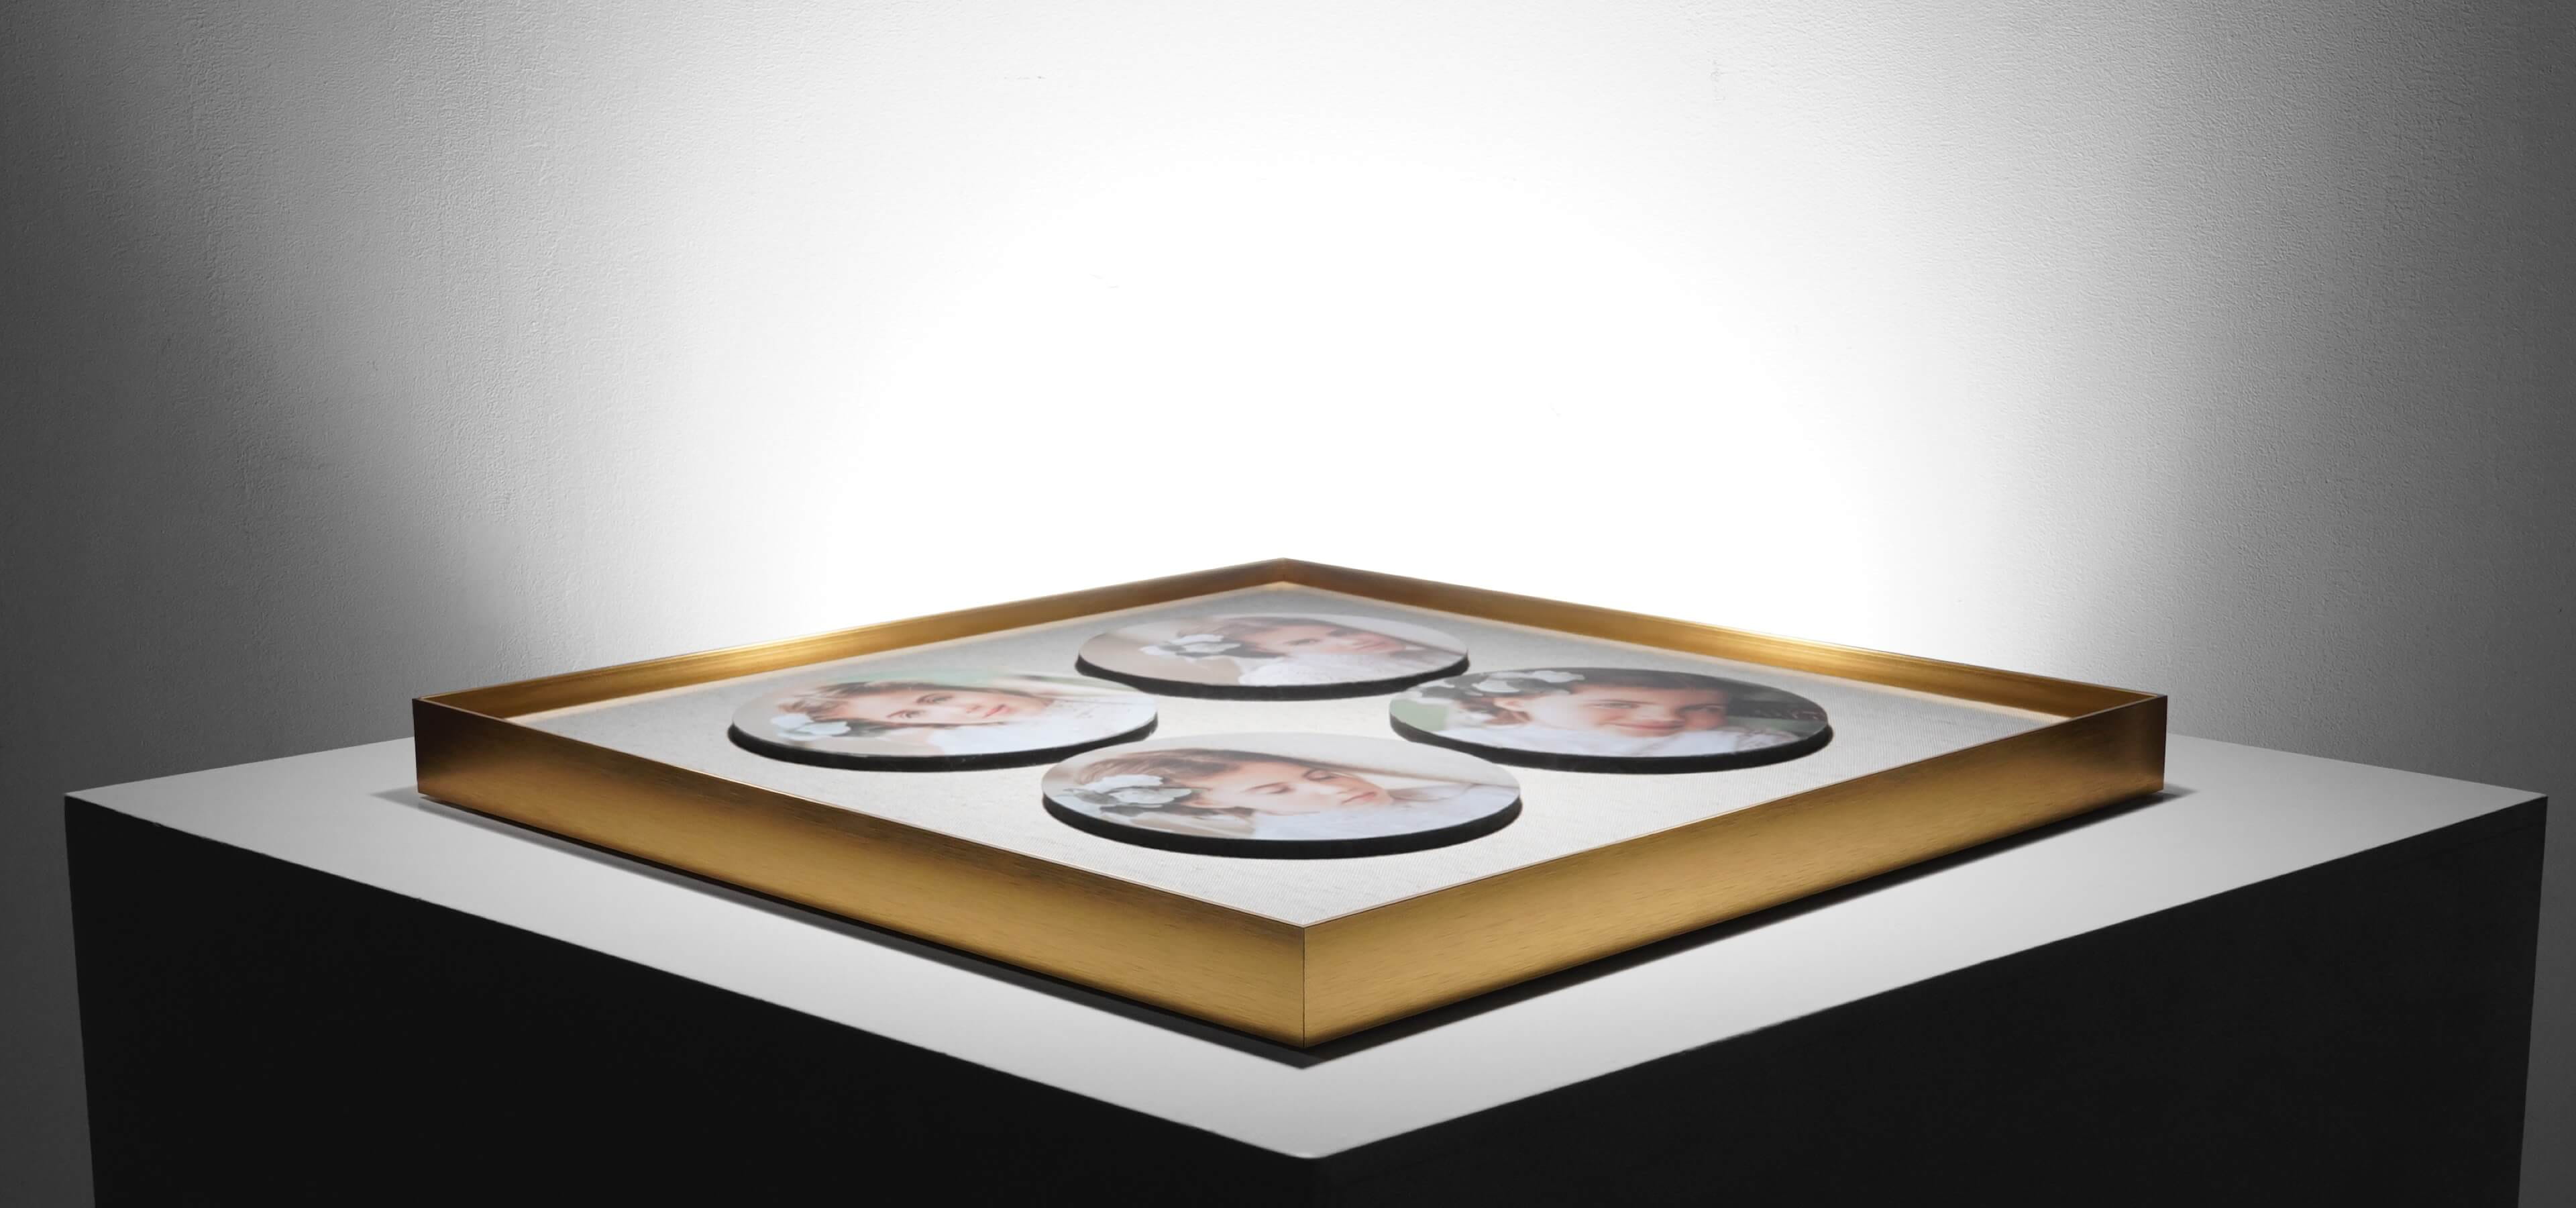 collage frame with thin gold frame and four circular photos laying on table